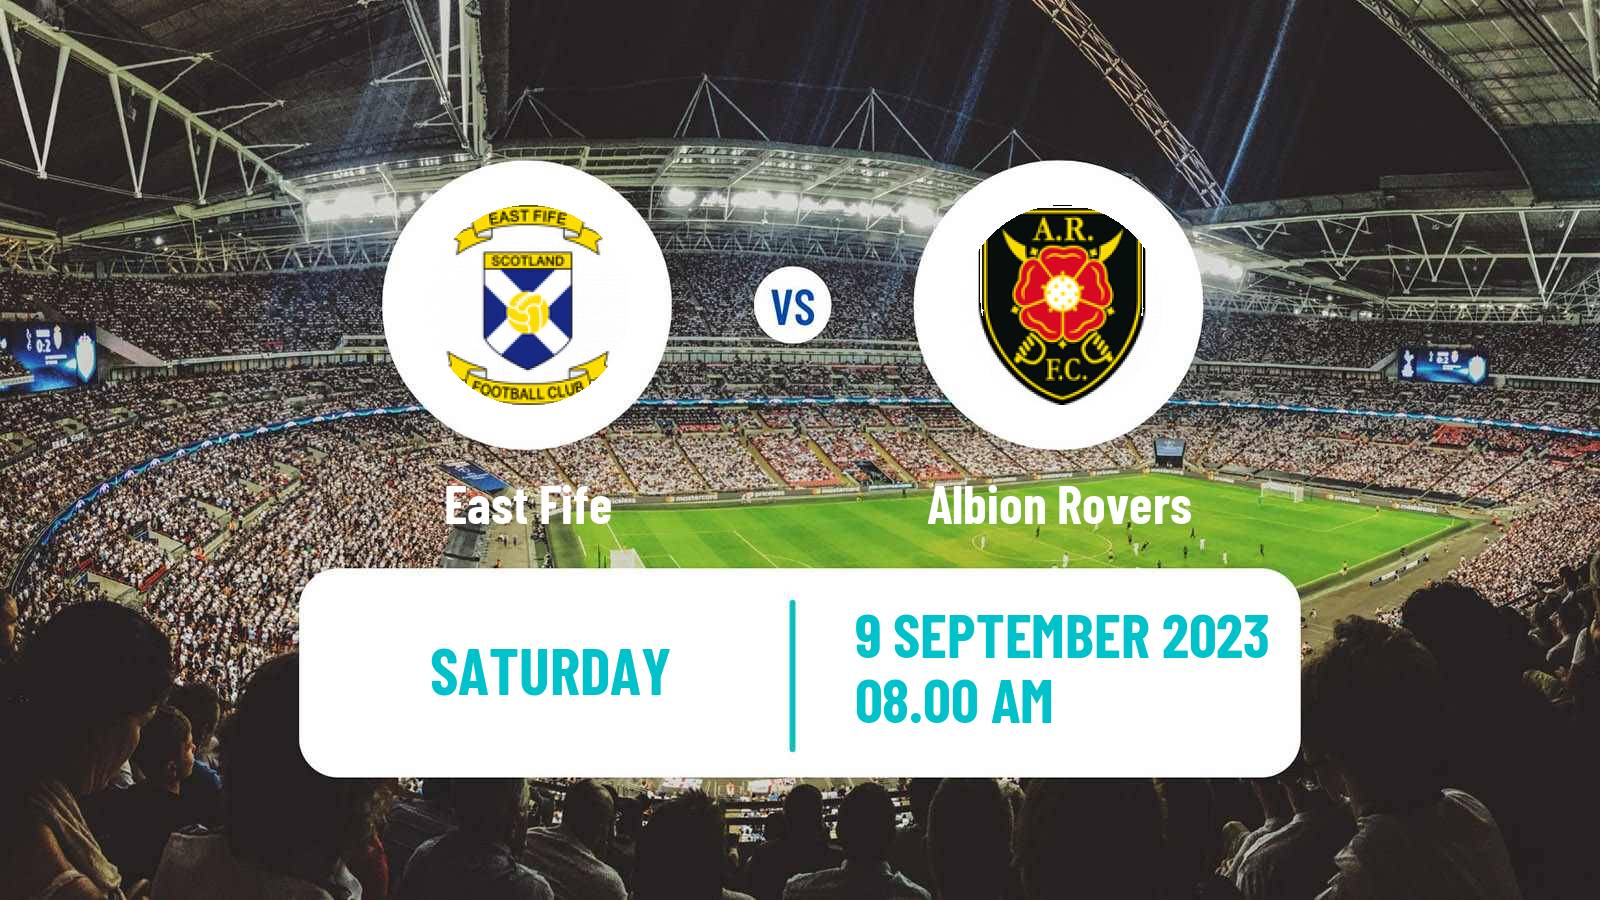 Soccer Scottish Challenge Cup East Fife - Albion Rovers